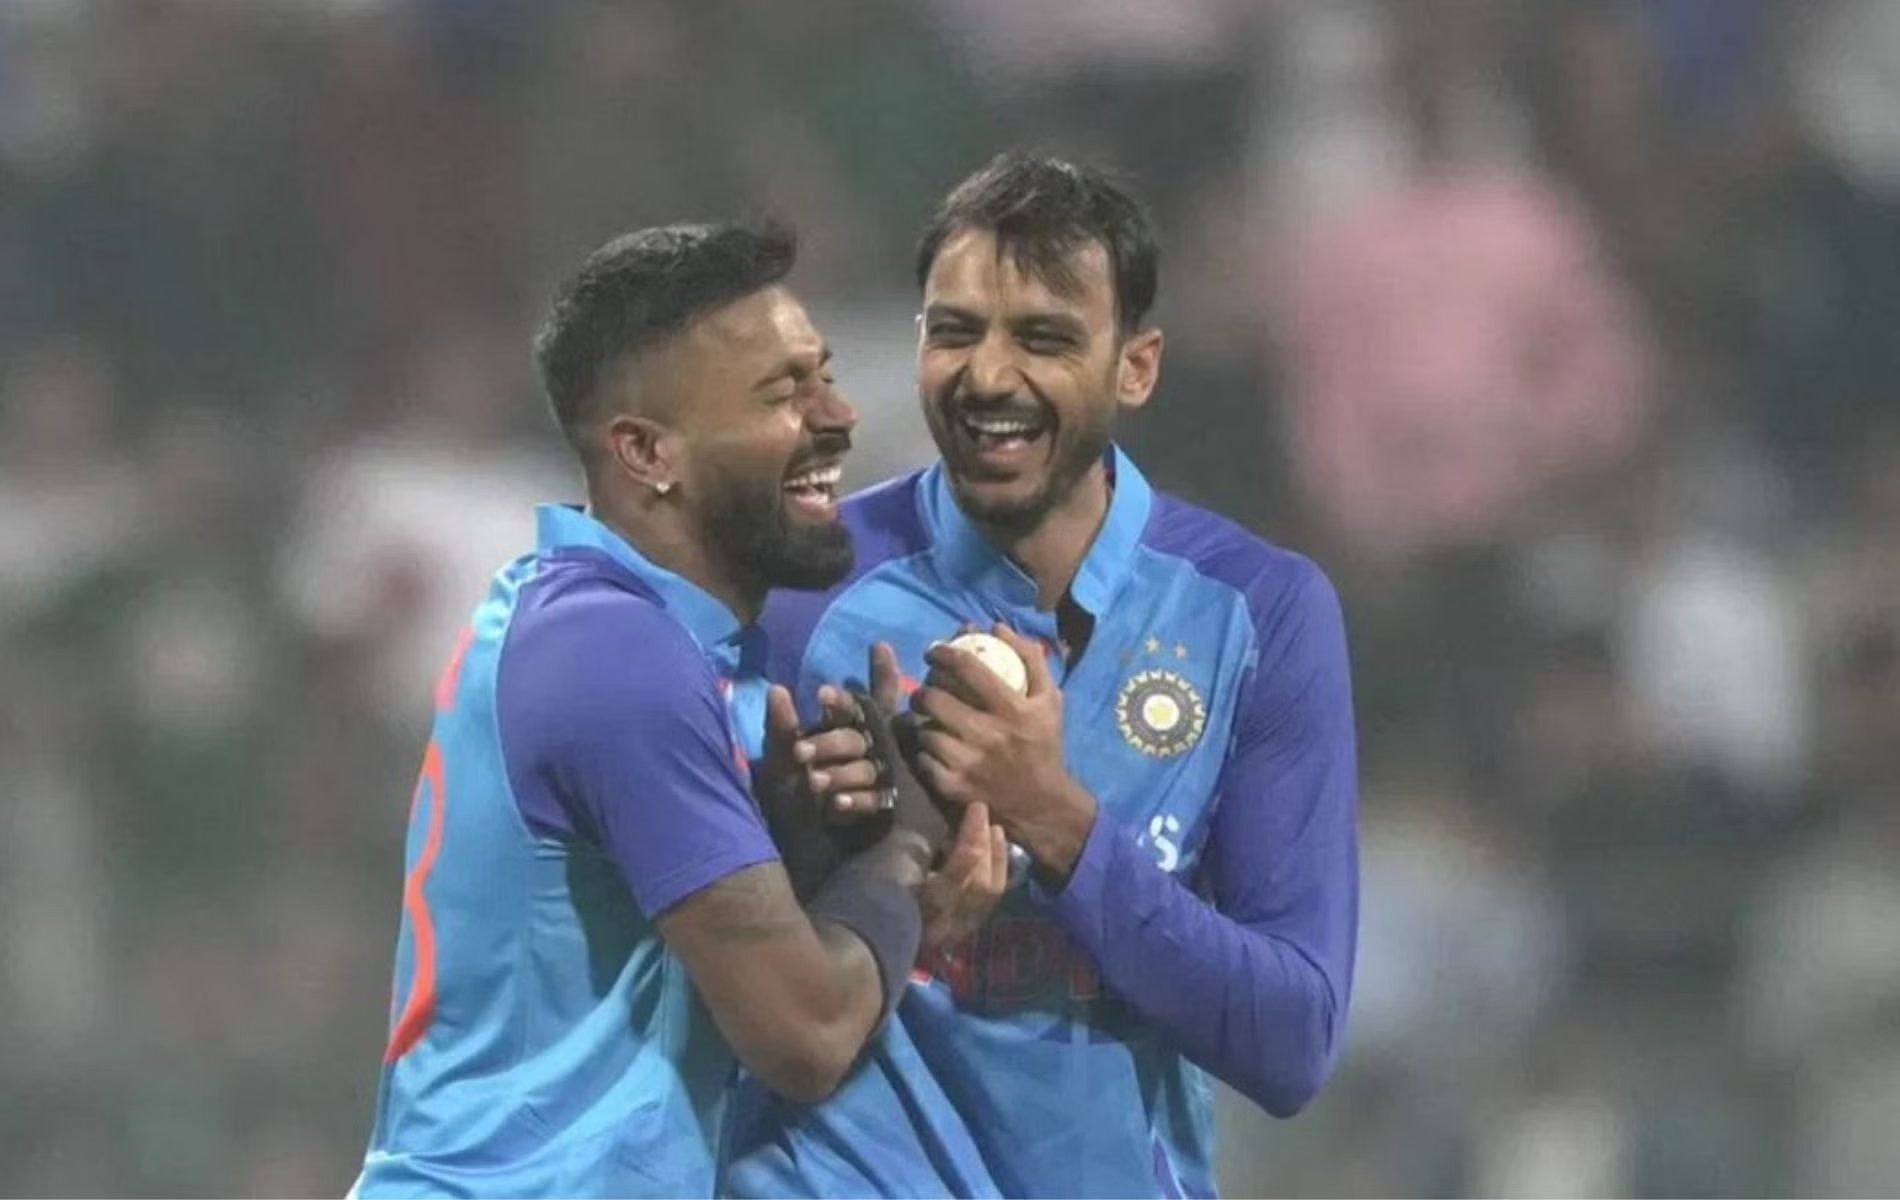 Hardik Pandya bowled out Axar Patel before Nicholas Pooran came to the crease in the 3rd T20I. [P/C: Twitter]